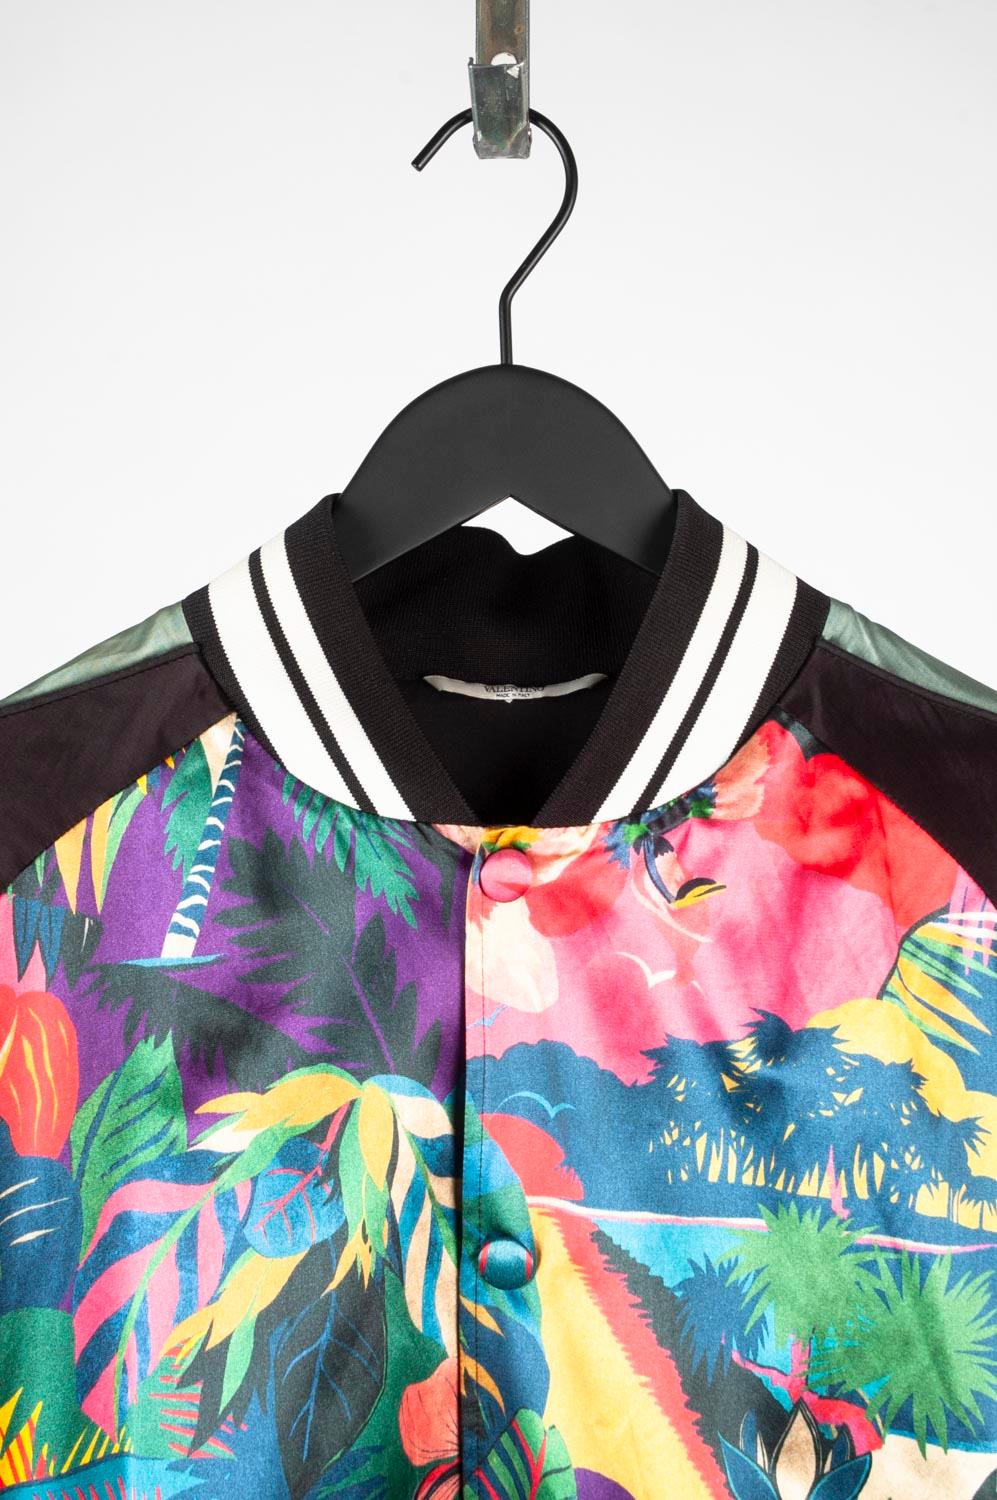 Item for sale is 100% genuine Valentino Floral Print Men Jacket, S531
Color: Multicolored
(An actual color may a bit vary due to individual computer screen interpretation)
Material: 62% viscose, 38% cotton
Tag size: 48 runs M
This jacket is great